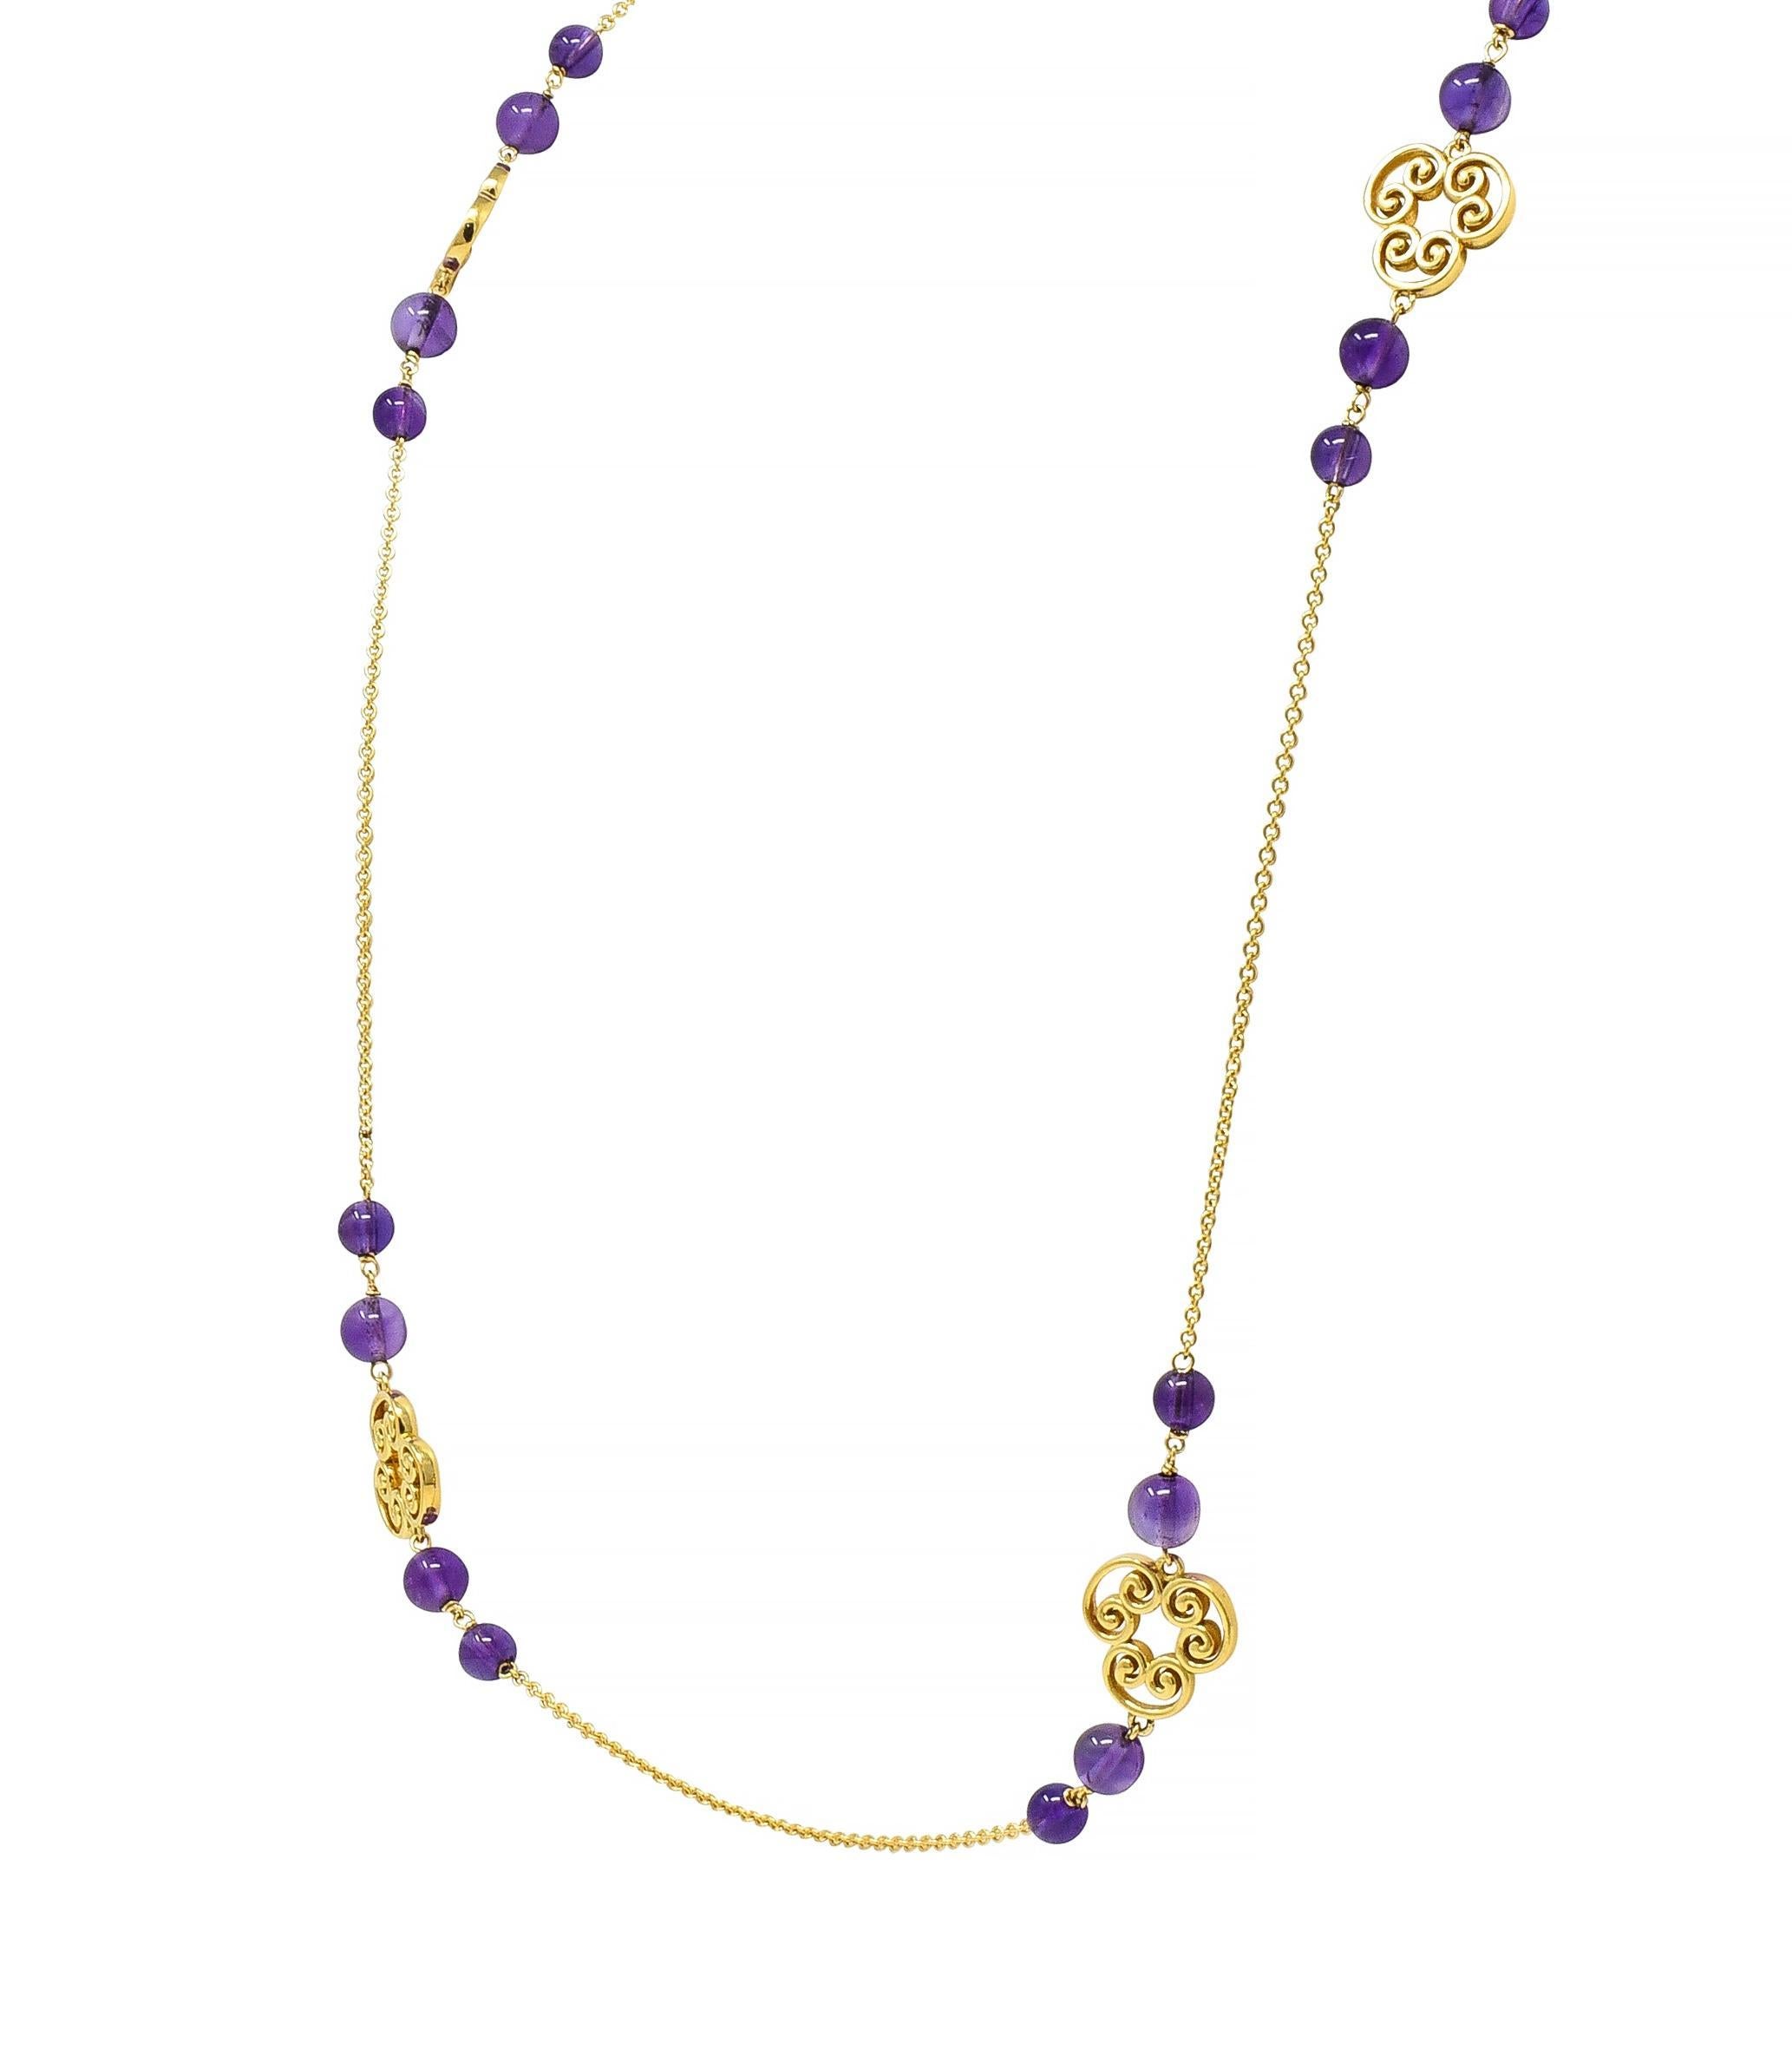 Paloma Picasso Tiffany & Co Amethyst 18 Karat Gold Venezia Goldoni Necklace In Excellent Condition For Sale In Philadelphia, PA